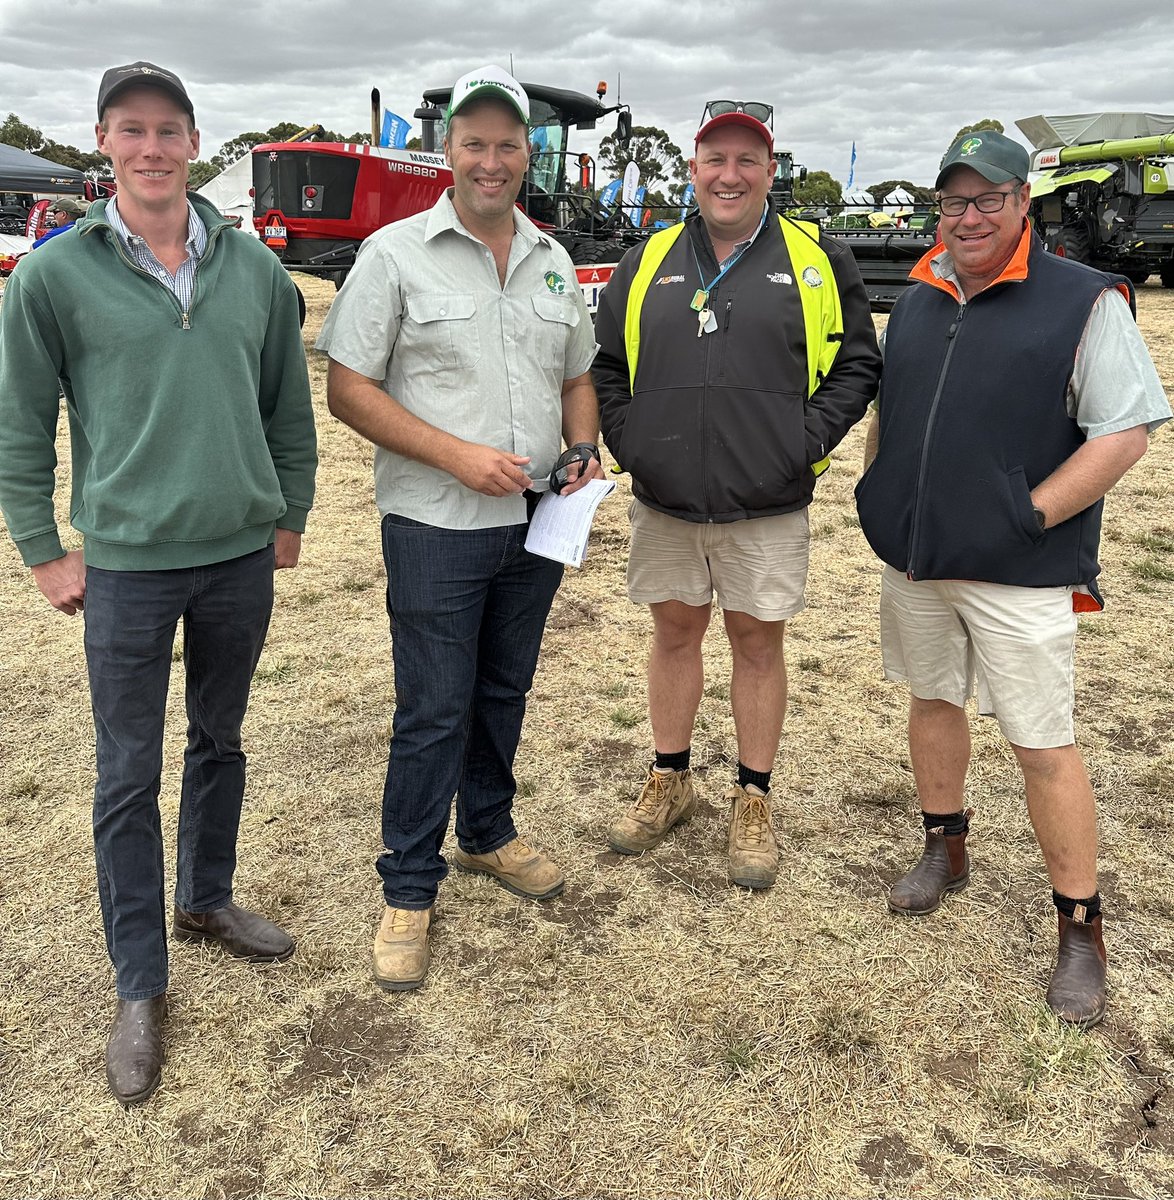 A big shout out to the Wimmera Machinery Field Days committee! 👋 This team is all about helping the community prosper and grow, and we can’t thank them enough for their dedication in making 2023 a success 🙌
#WimmeraFieldDays23 #wmfd23 #teamwork #aussiefarmers